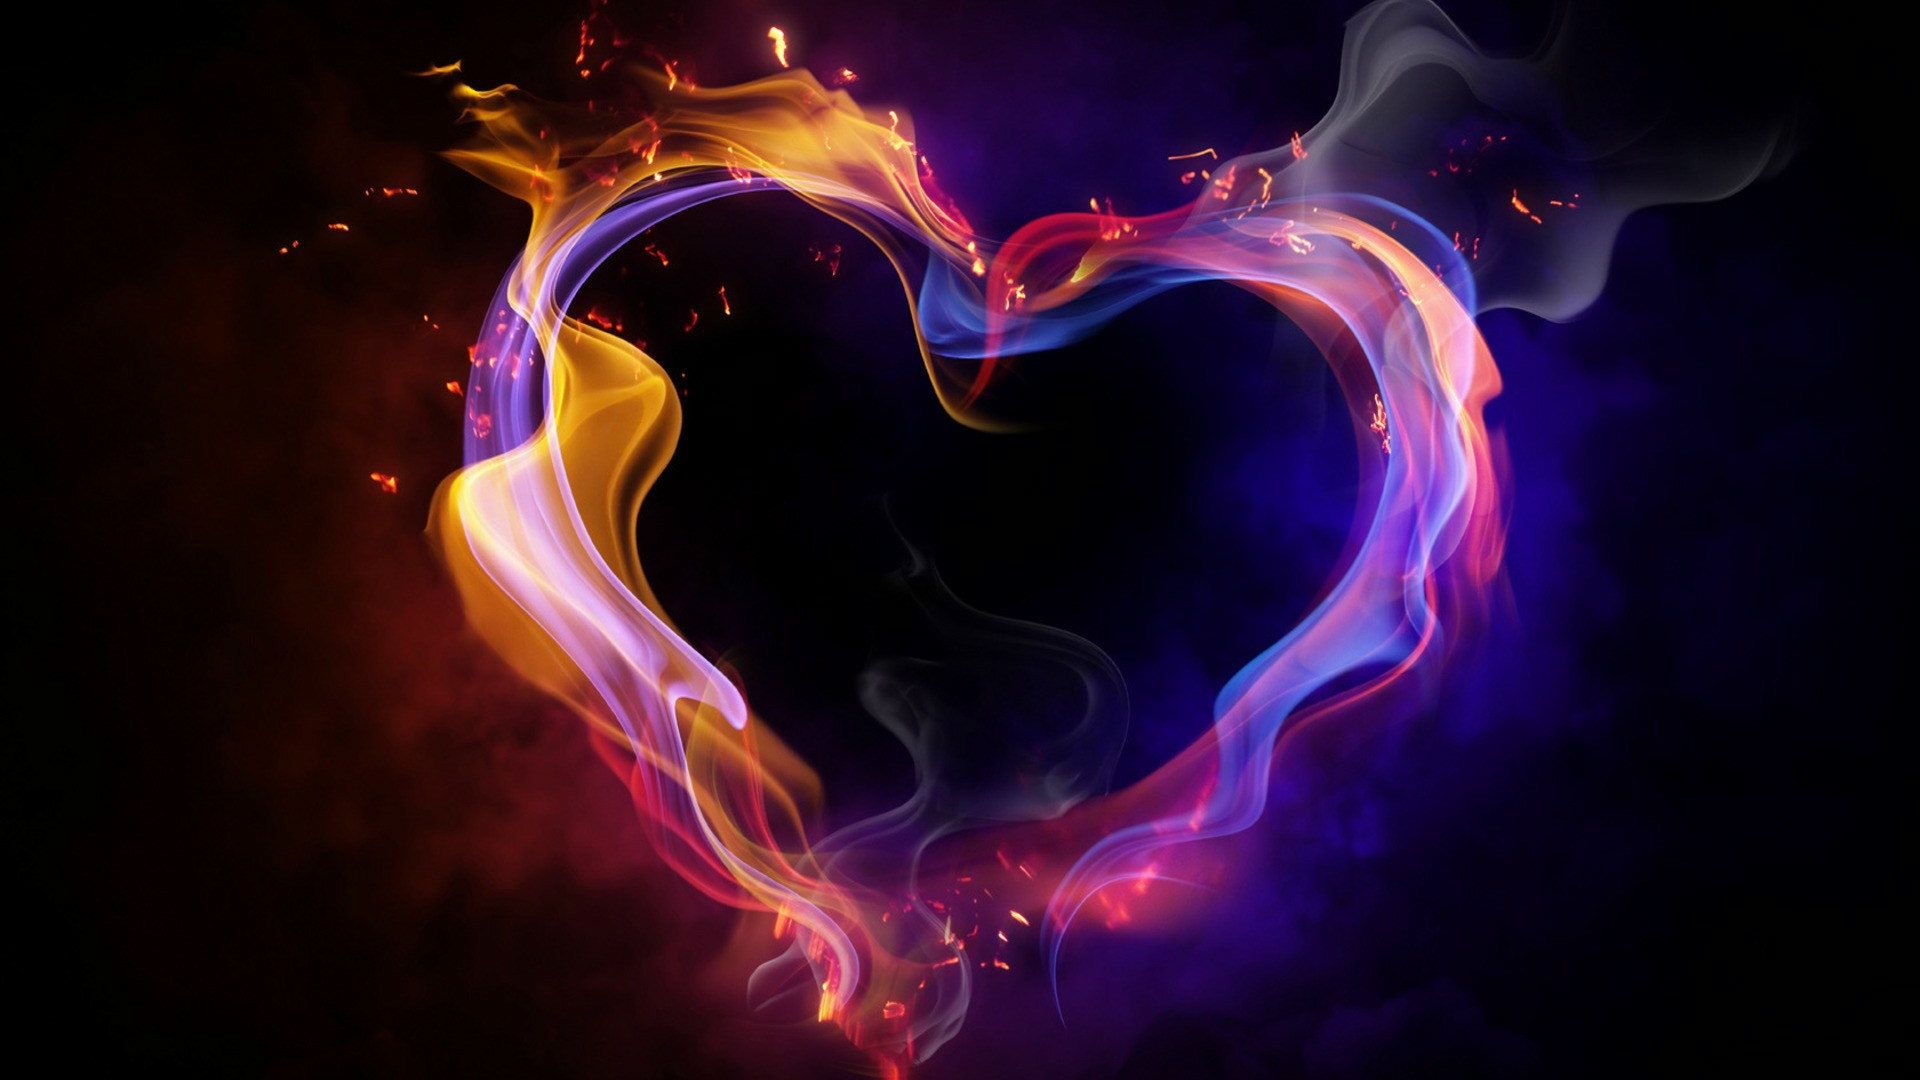 Awesome Heart Background wallpaper 1920x1080